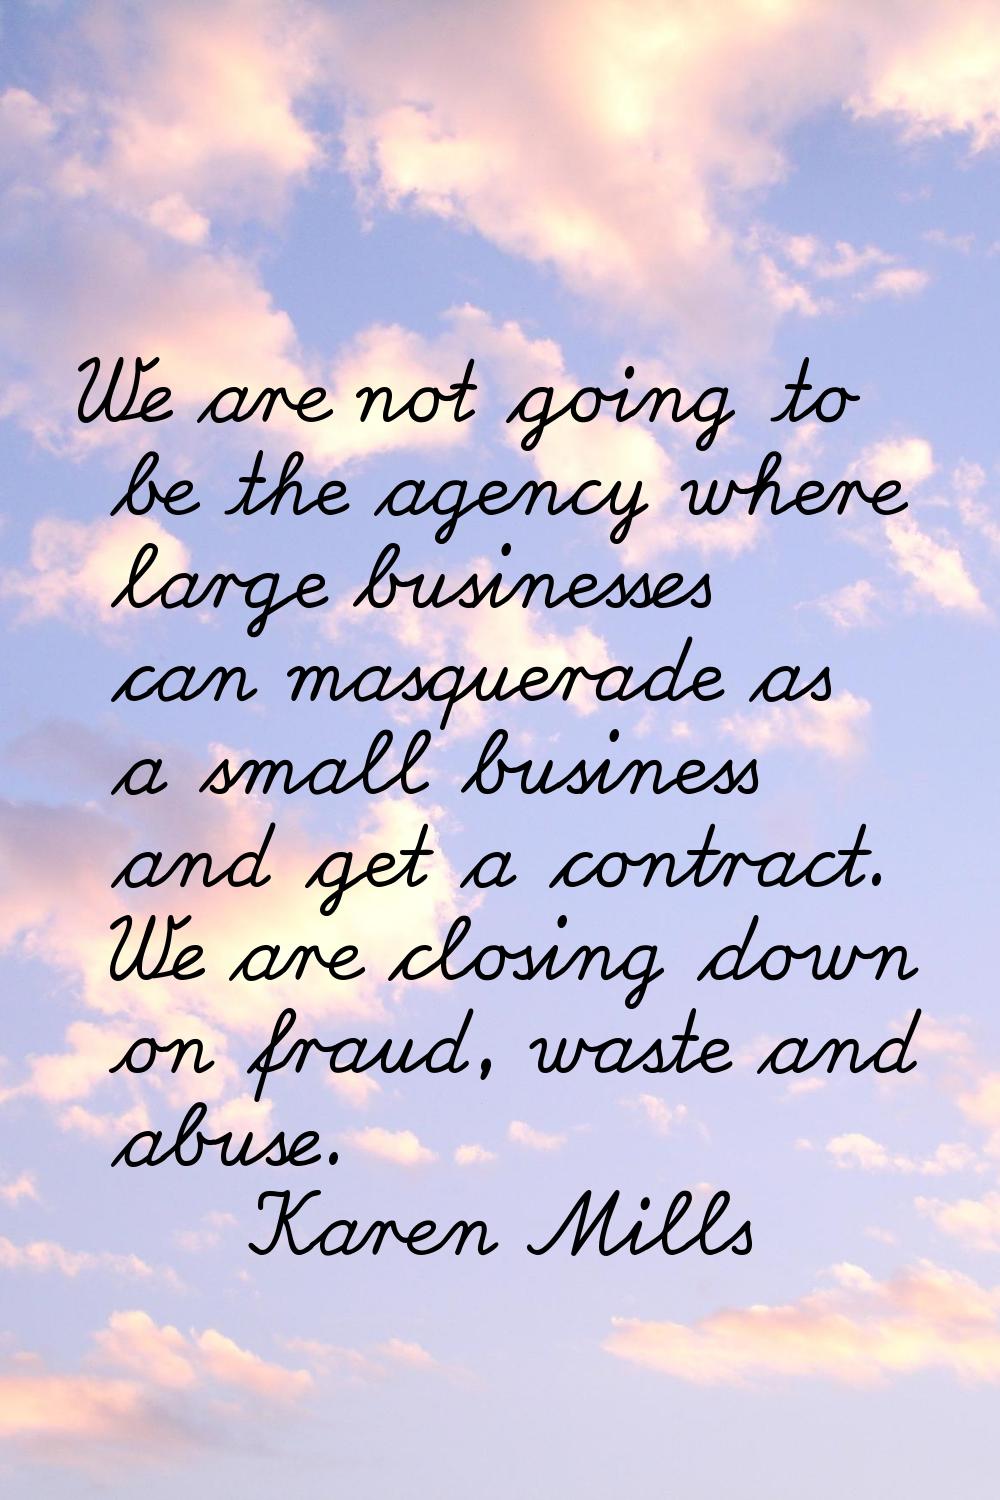 We are not going to be the agency where large businesses can masquerade as a small business and get